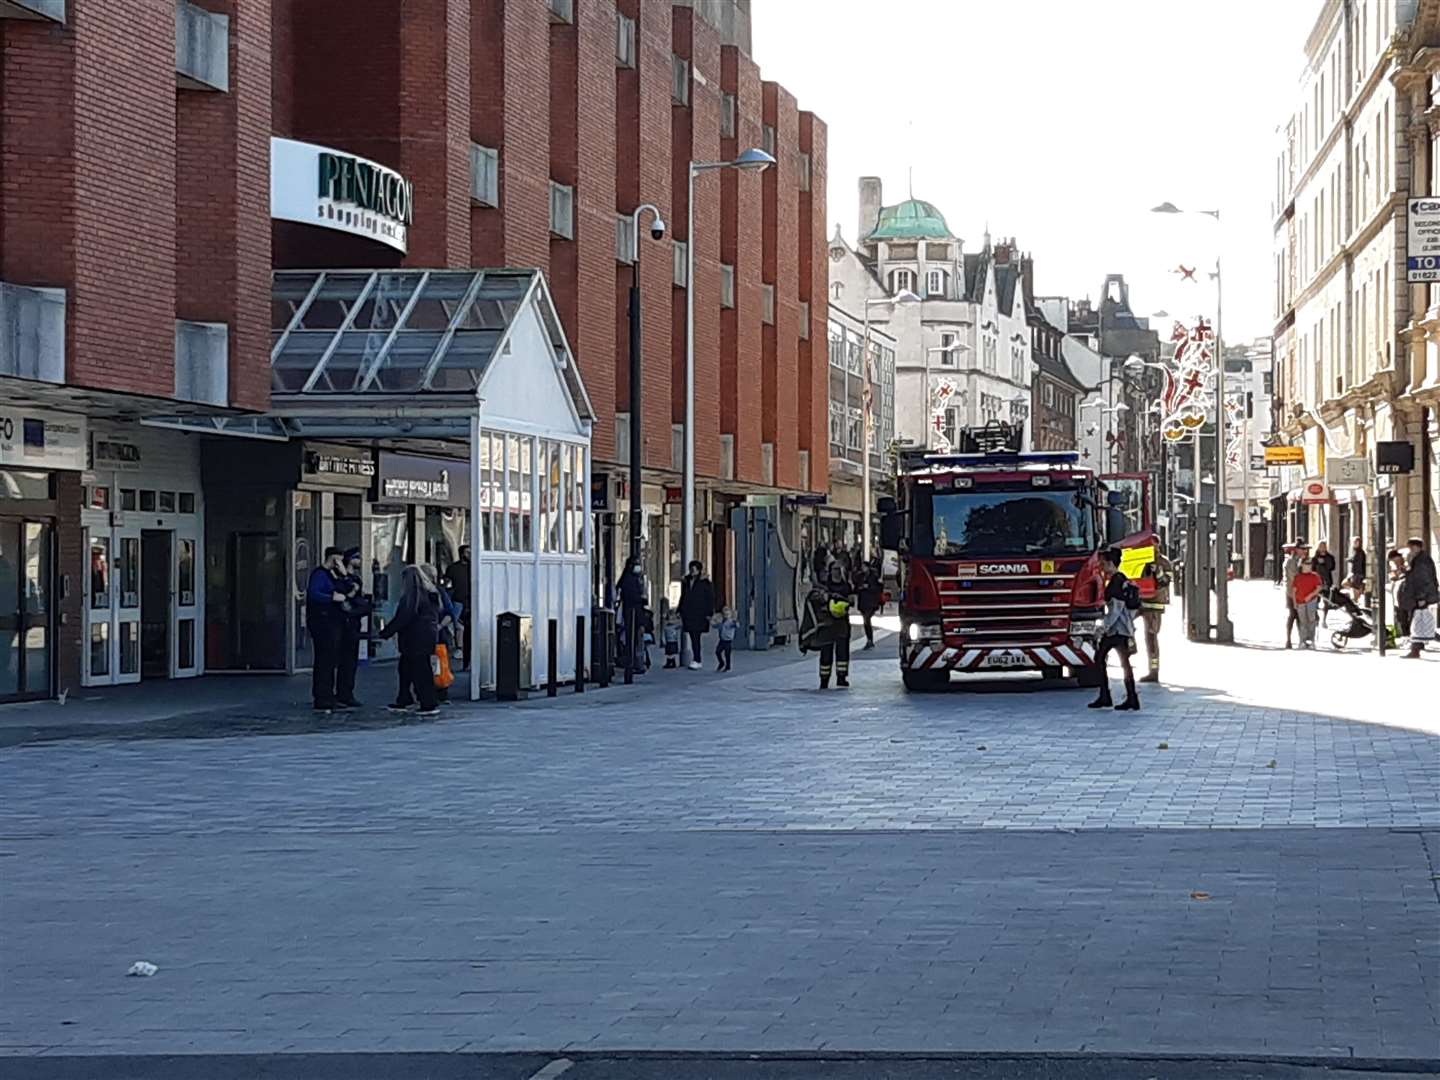 Firefighters were called to the Pentagon Centre in Chatham as hundreds were evacuated from the building